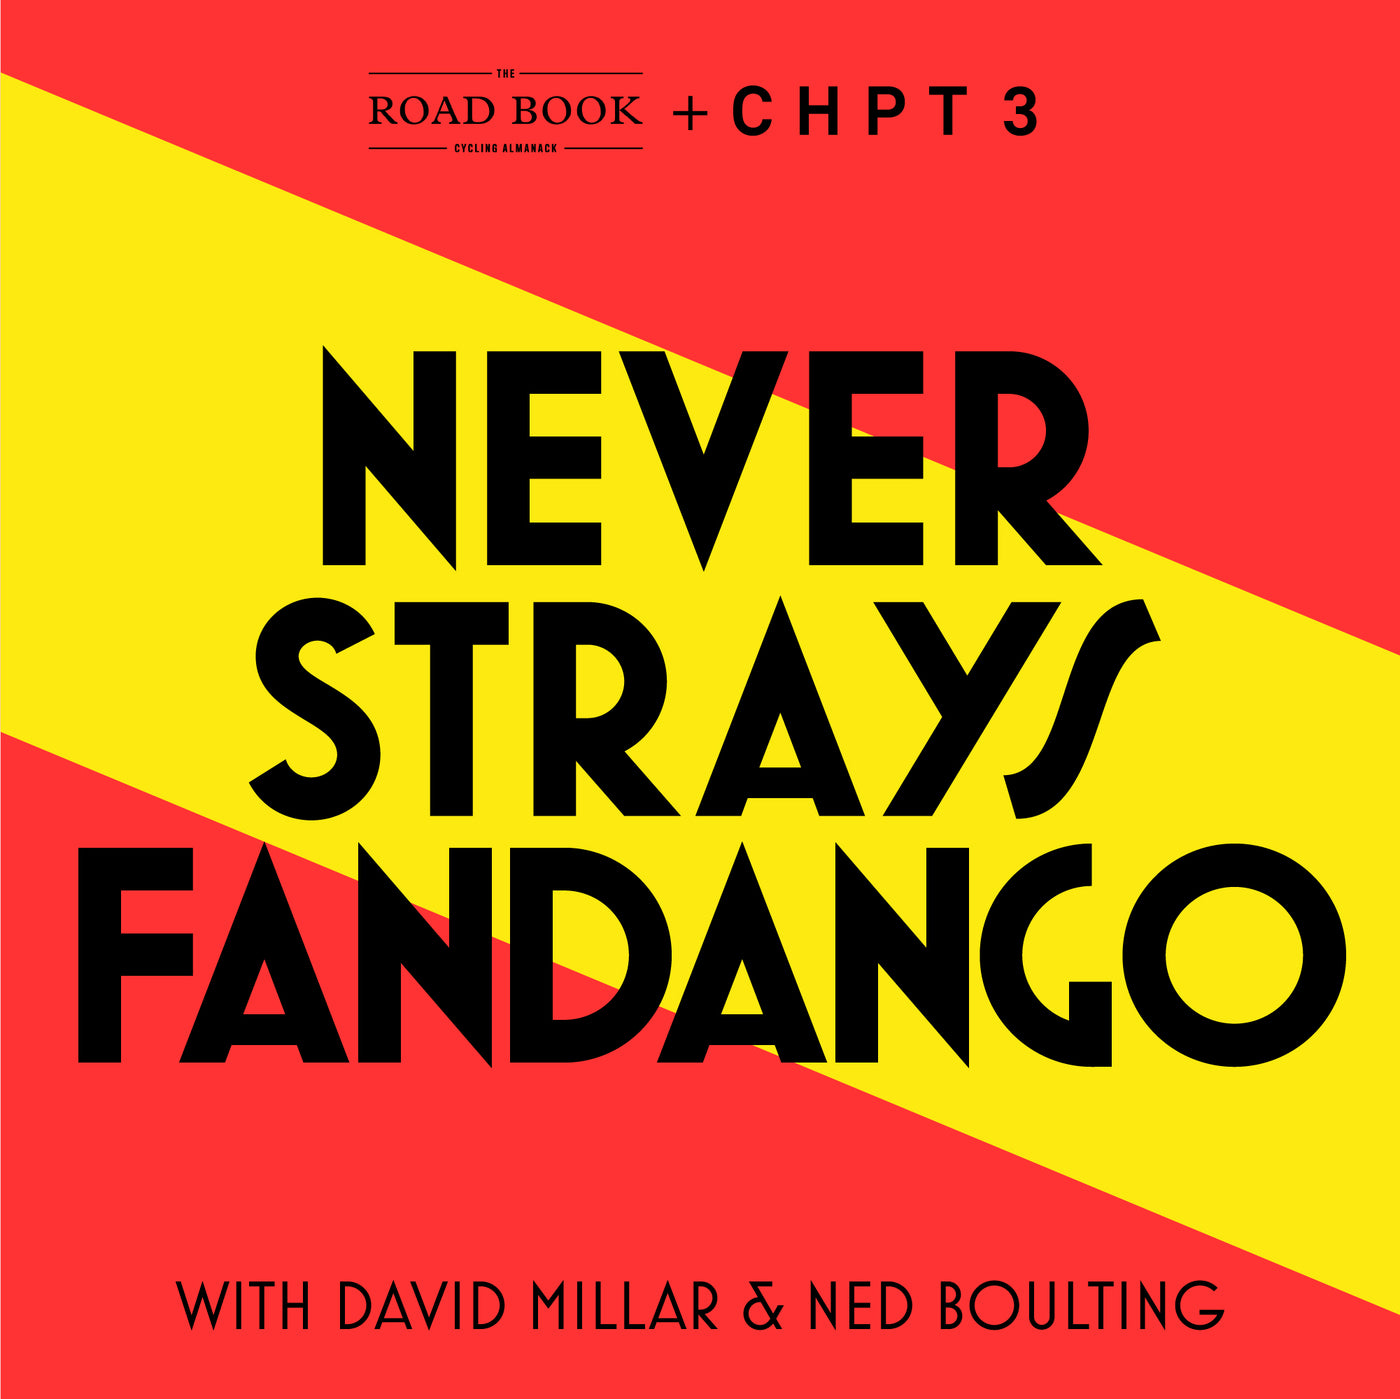 NEVER STRAYS Fandango - The confusing One 